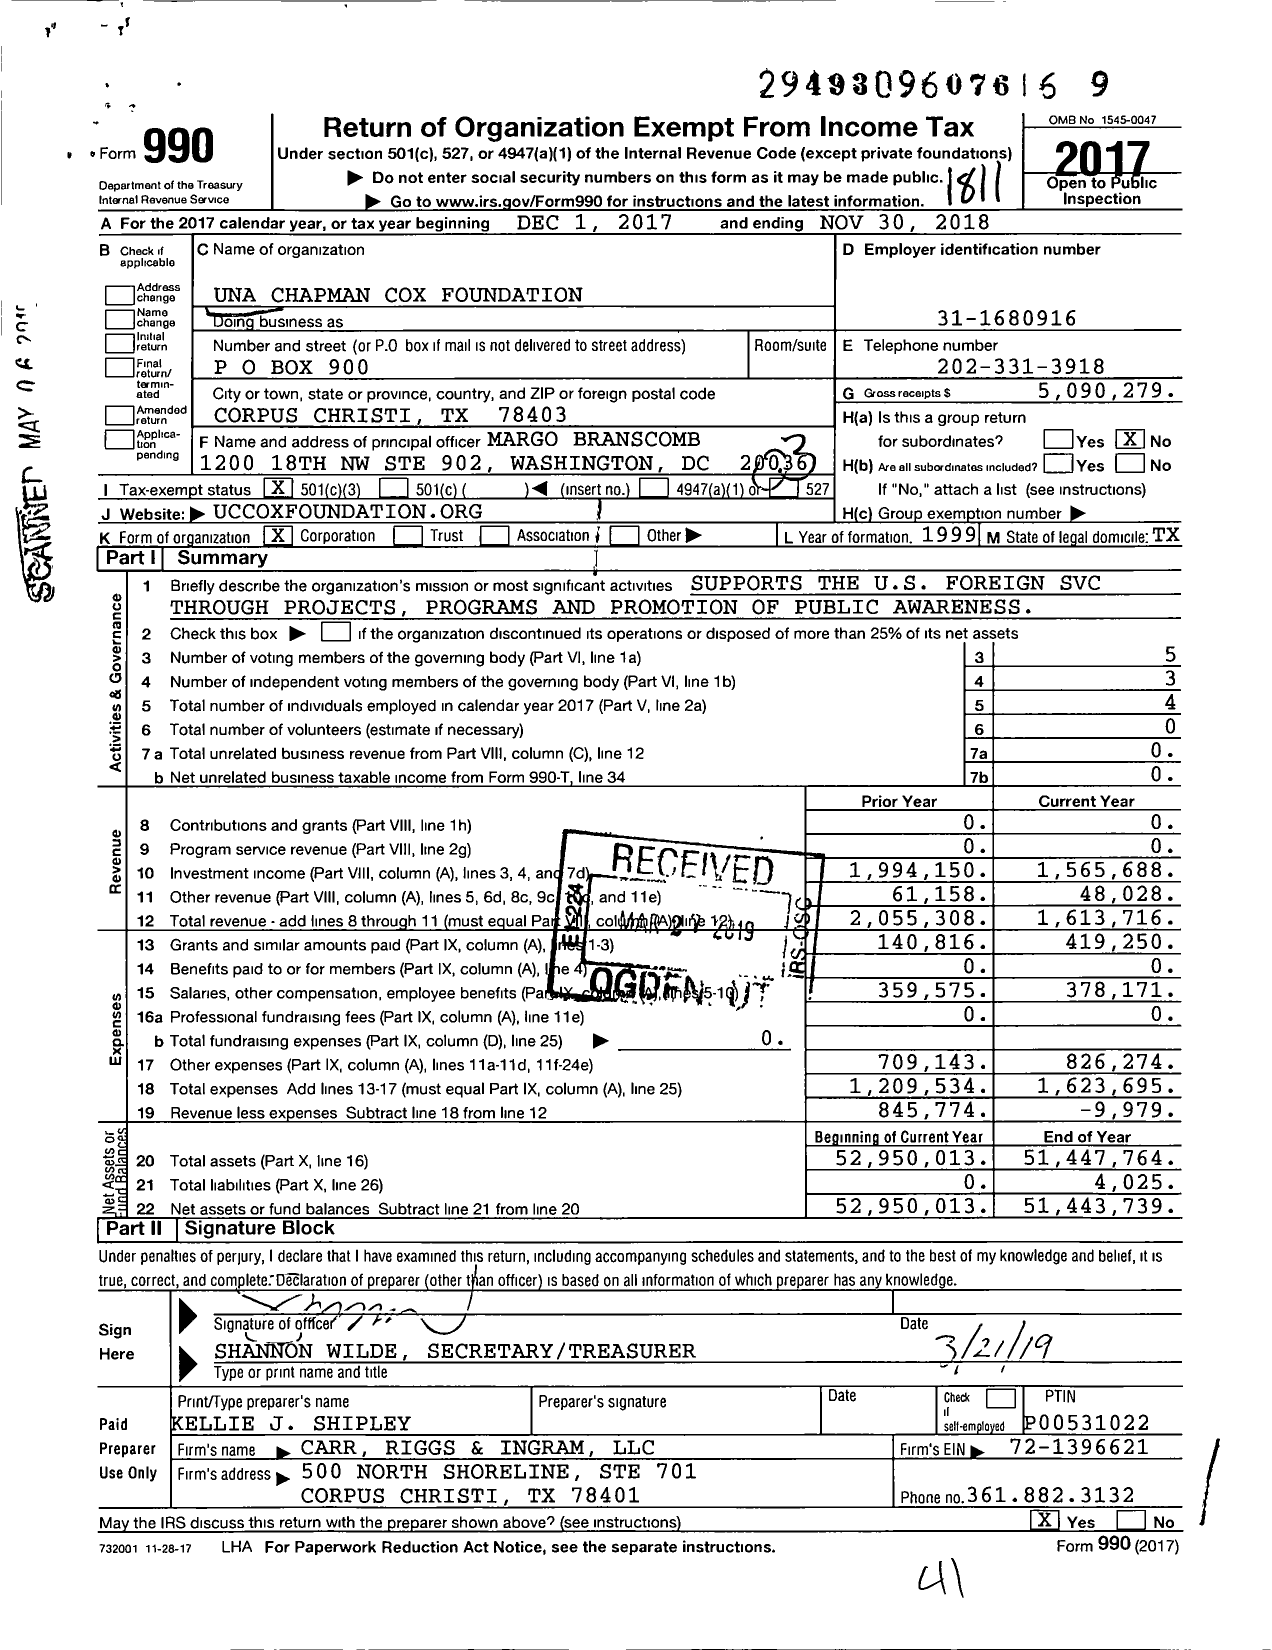 Image of first page of 2017 Form 990 for Una Chapman Cox Foundation